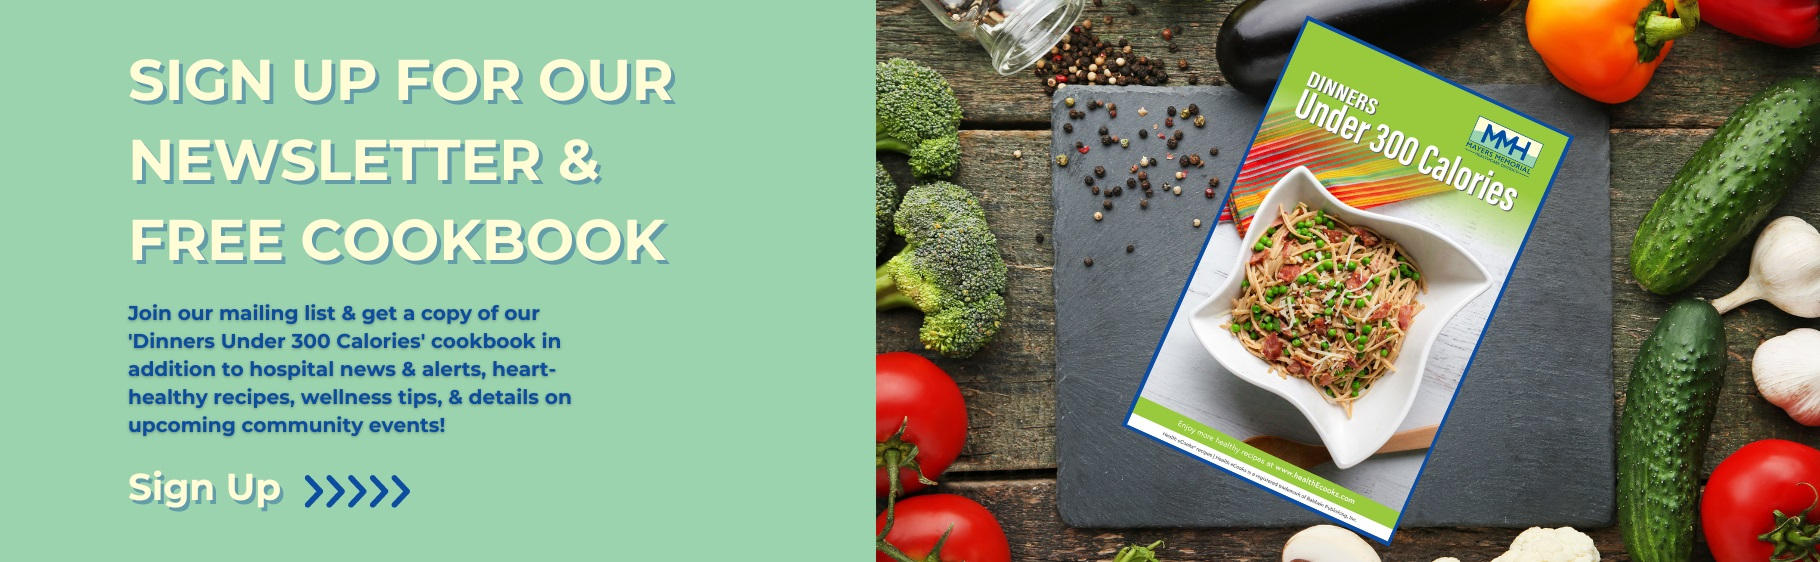 Sign up for our newsletter and free cookbook. Join our mailing list and get a copy of our "Dinners Under 300 Calories" cookbook in addition to the hospital news and alerts, heart-healthy recepies, wellness tips, and details on upcoming community events!